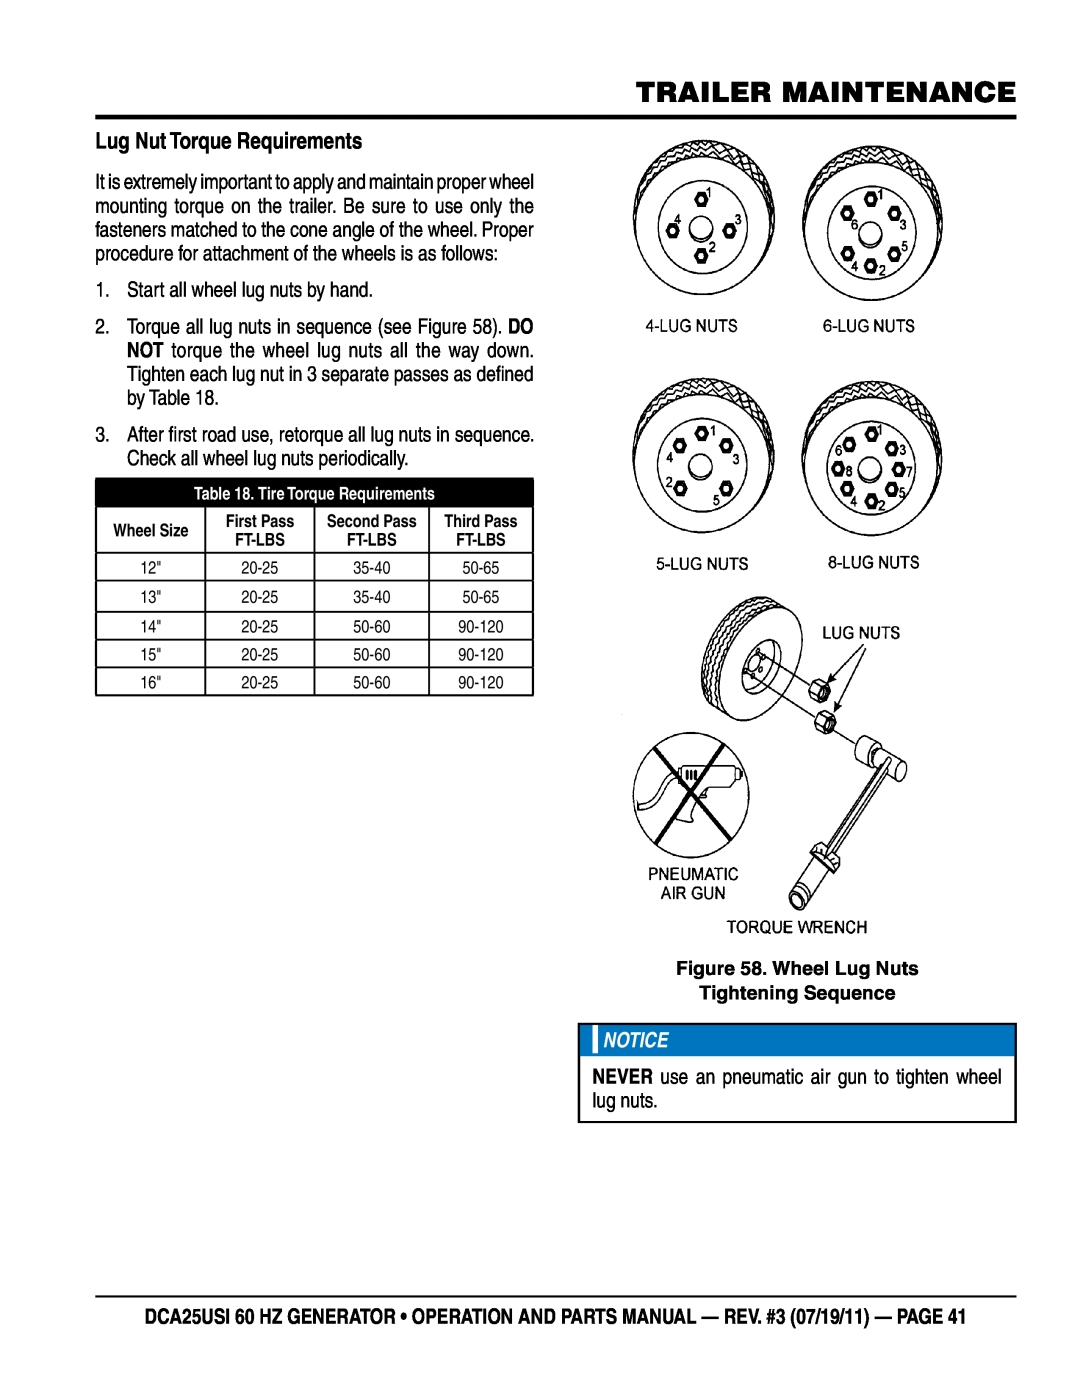 Multiquip DCA25USI manual Lug Nut Torque Requirements, Trailer Maintenance, Wheel Lug Nuts Tightening Sequence, Wheel Size 